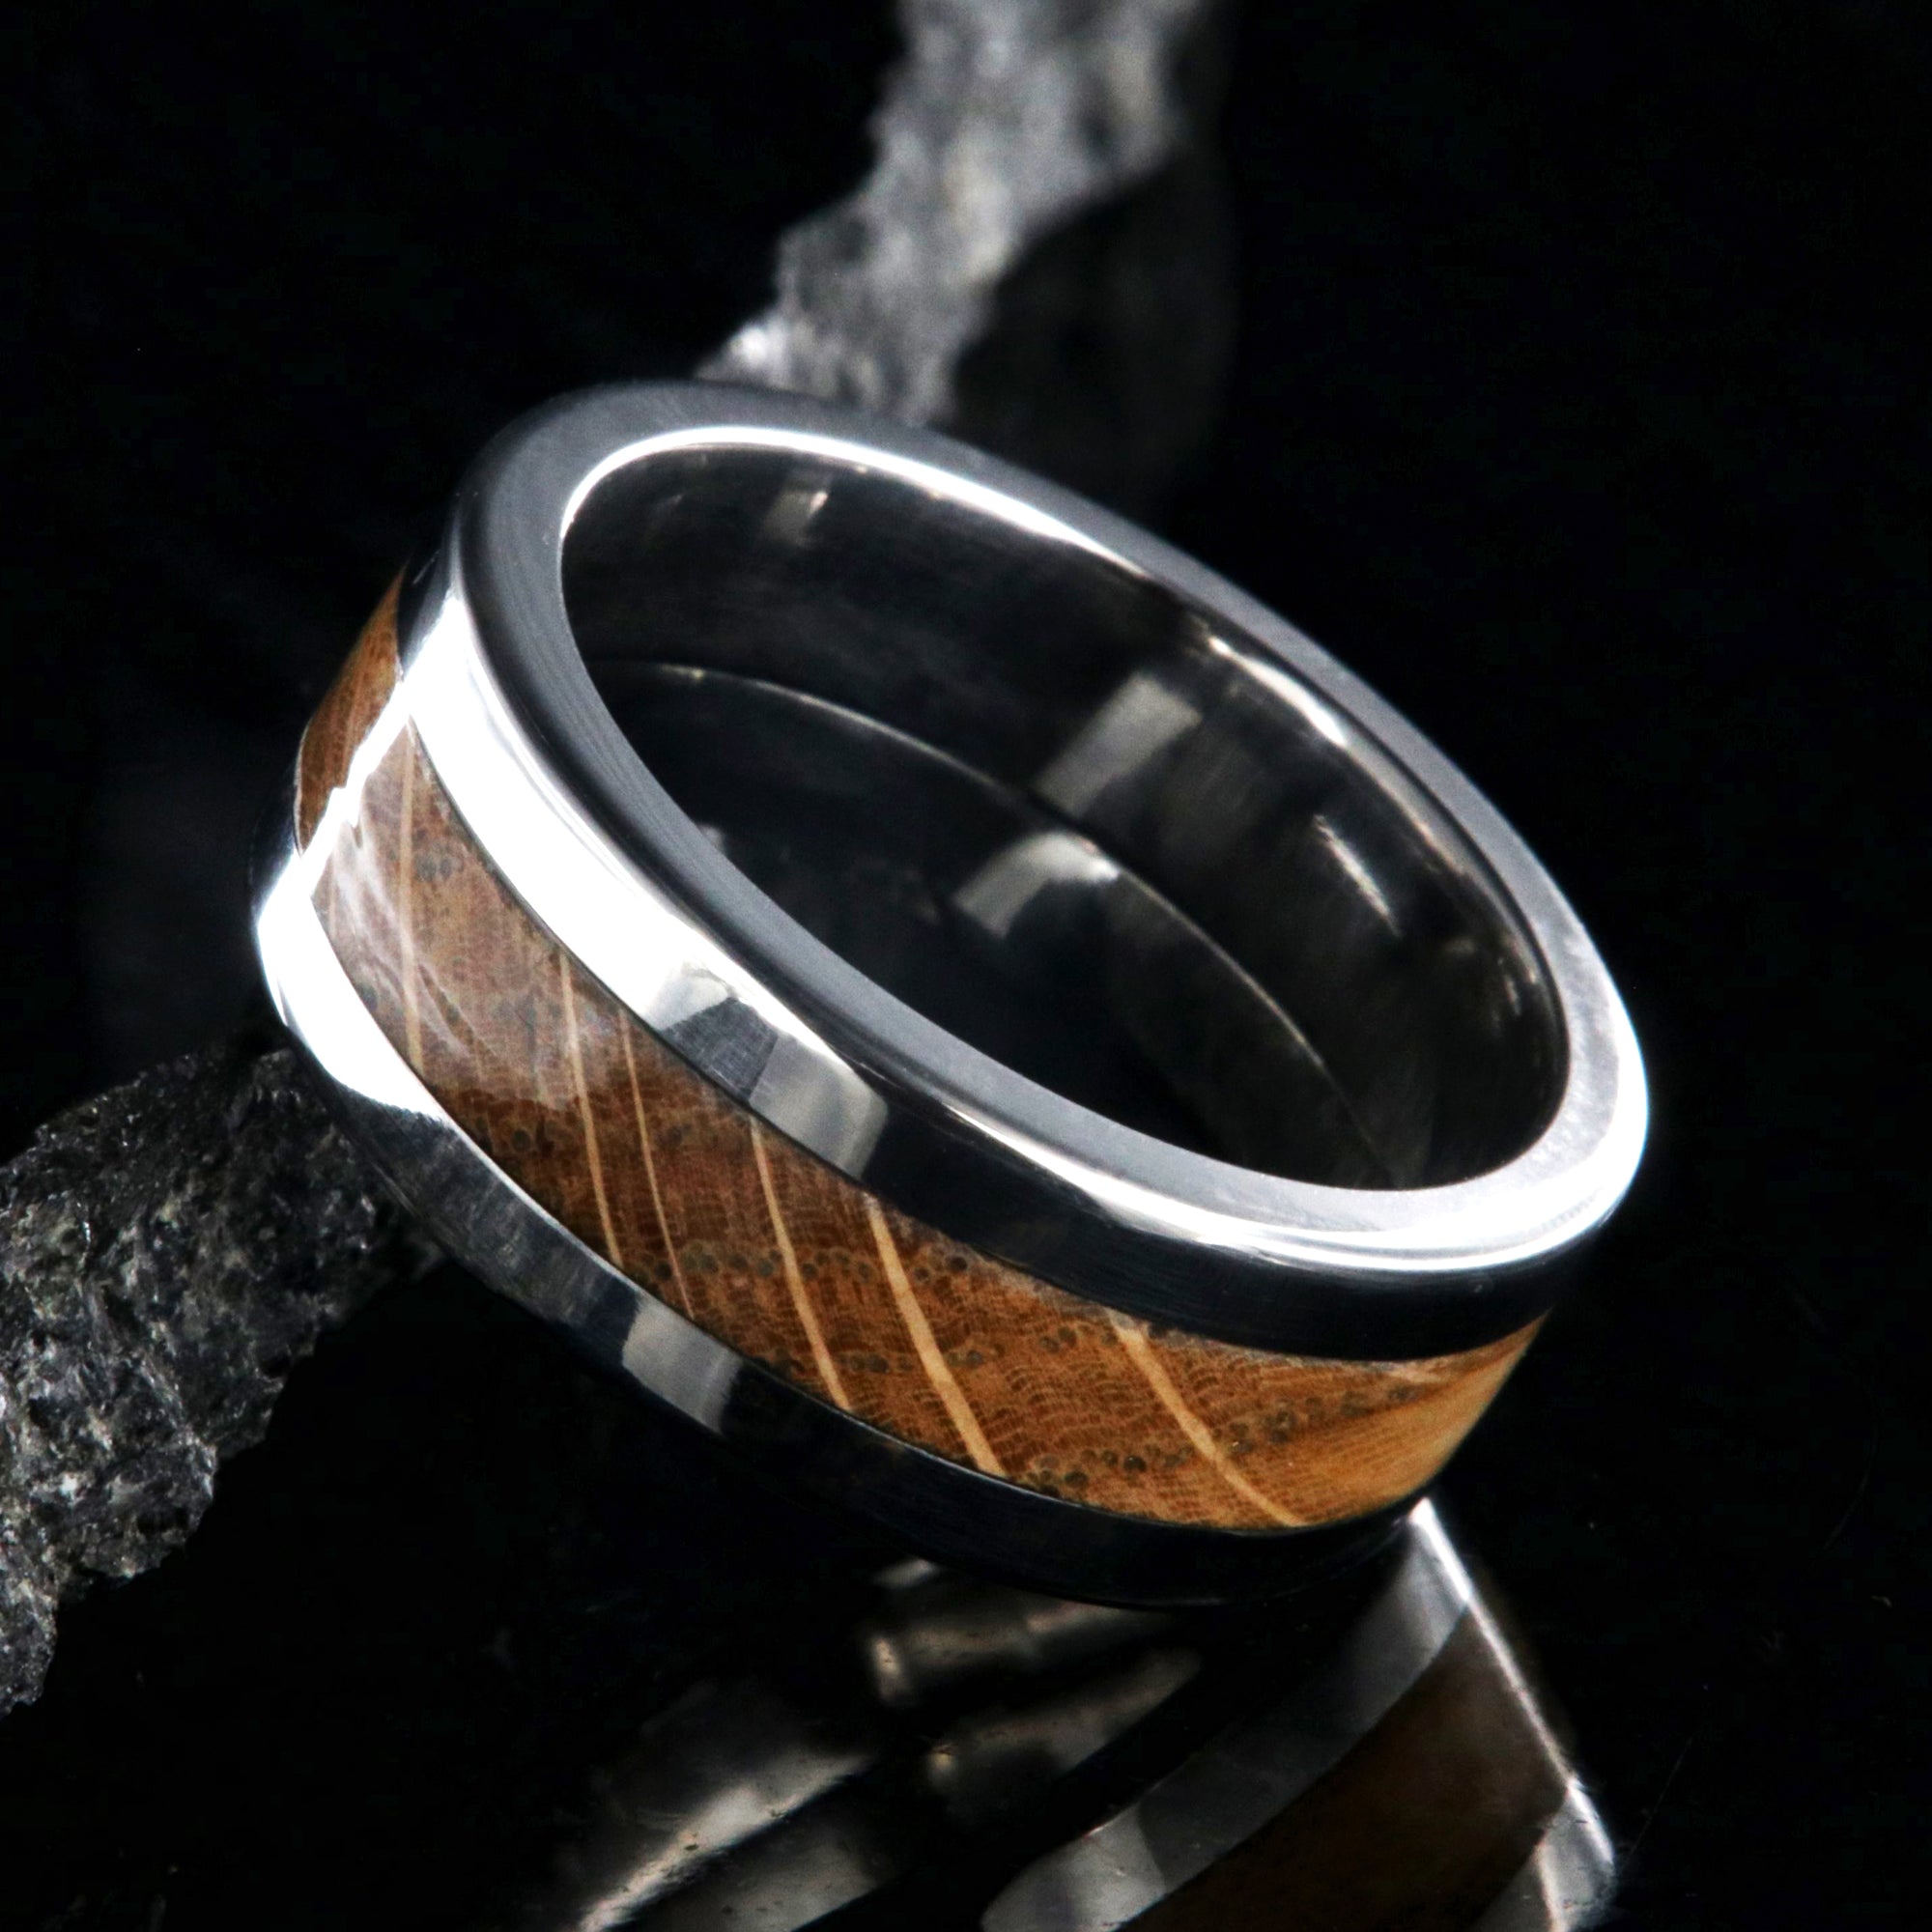 8mm wide wedding band with titanium edges and a whiskey barrel sleeve